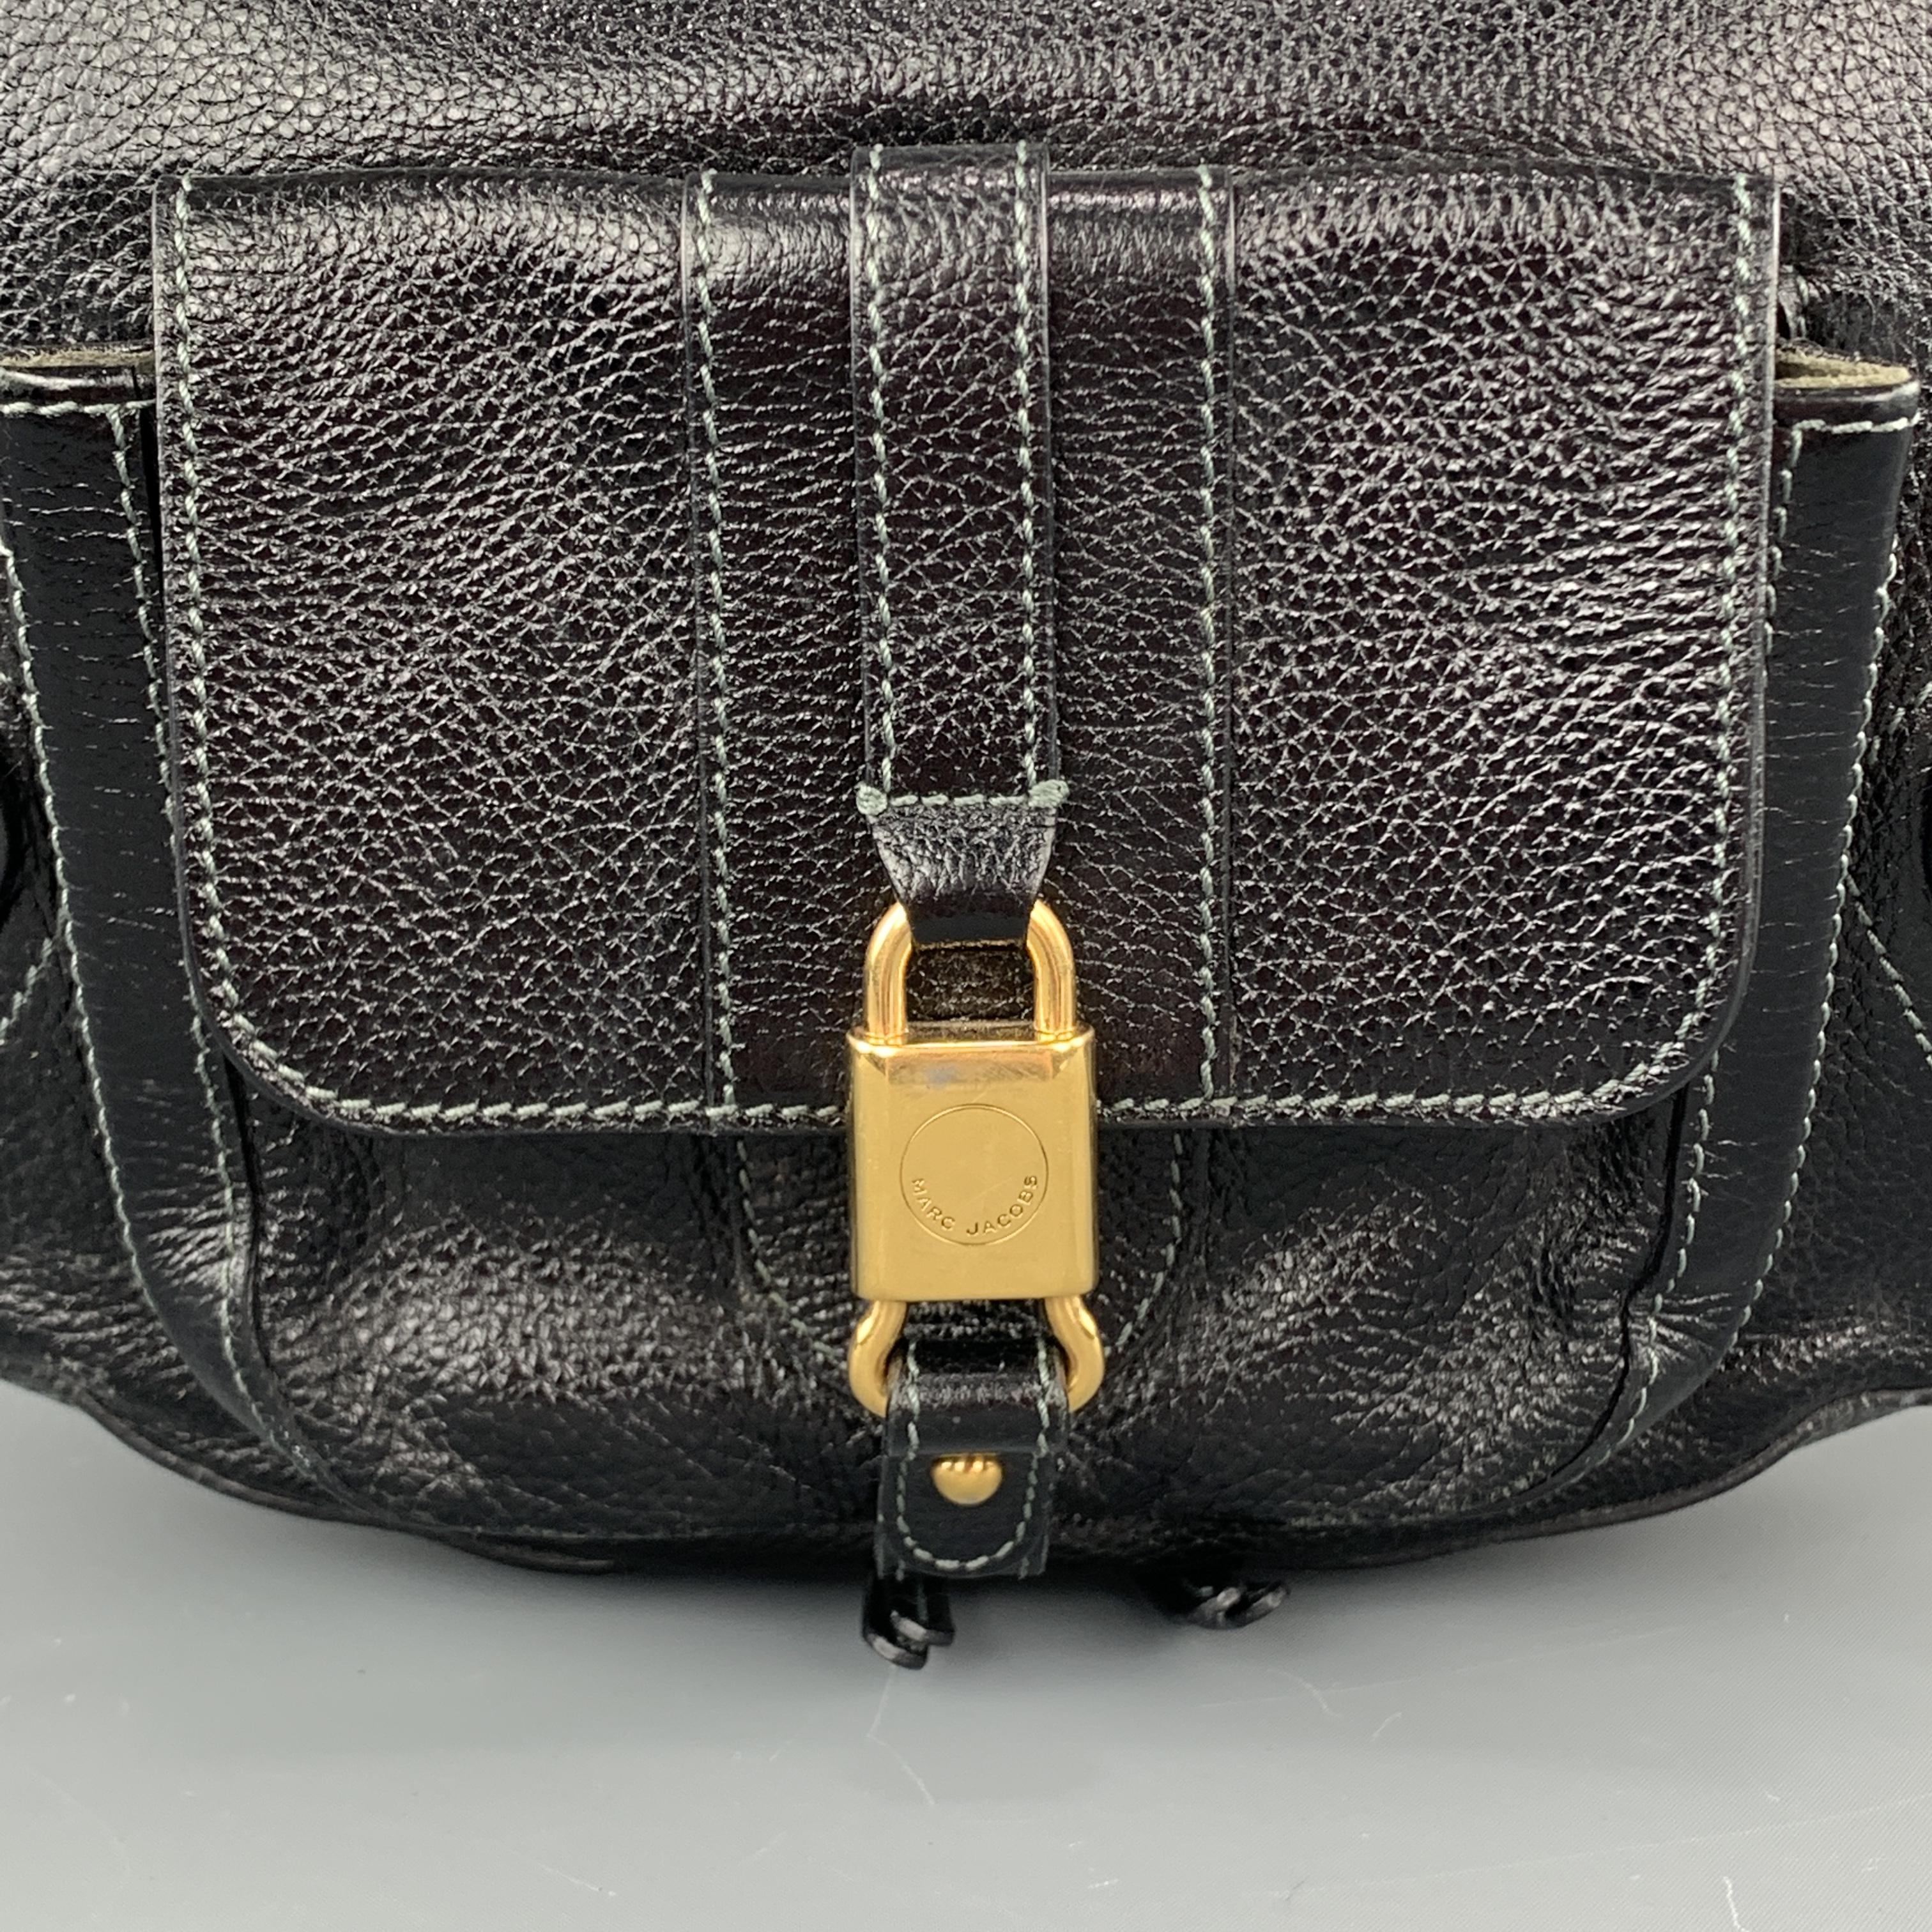 MARC JACOBS hobo bag comes in black textured patent leather with flap pocket, gol tone zips and lock hardware, and single shoulder strap. Made in Italy.

Very Good Pre-Owned Condition.

Measurements:

Length:15.75 in.
Width: 3 in.
Height: 12